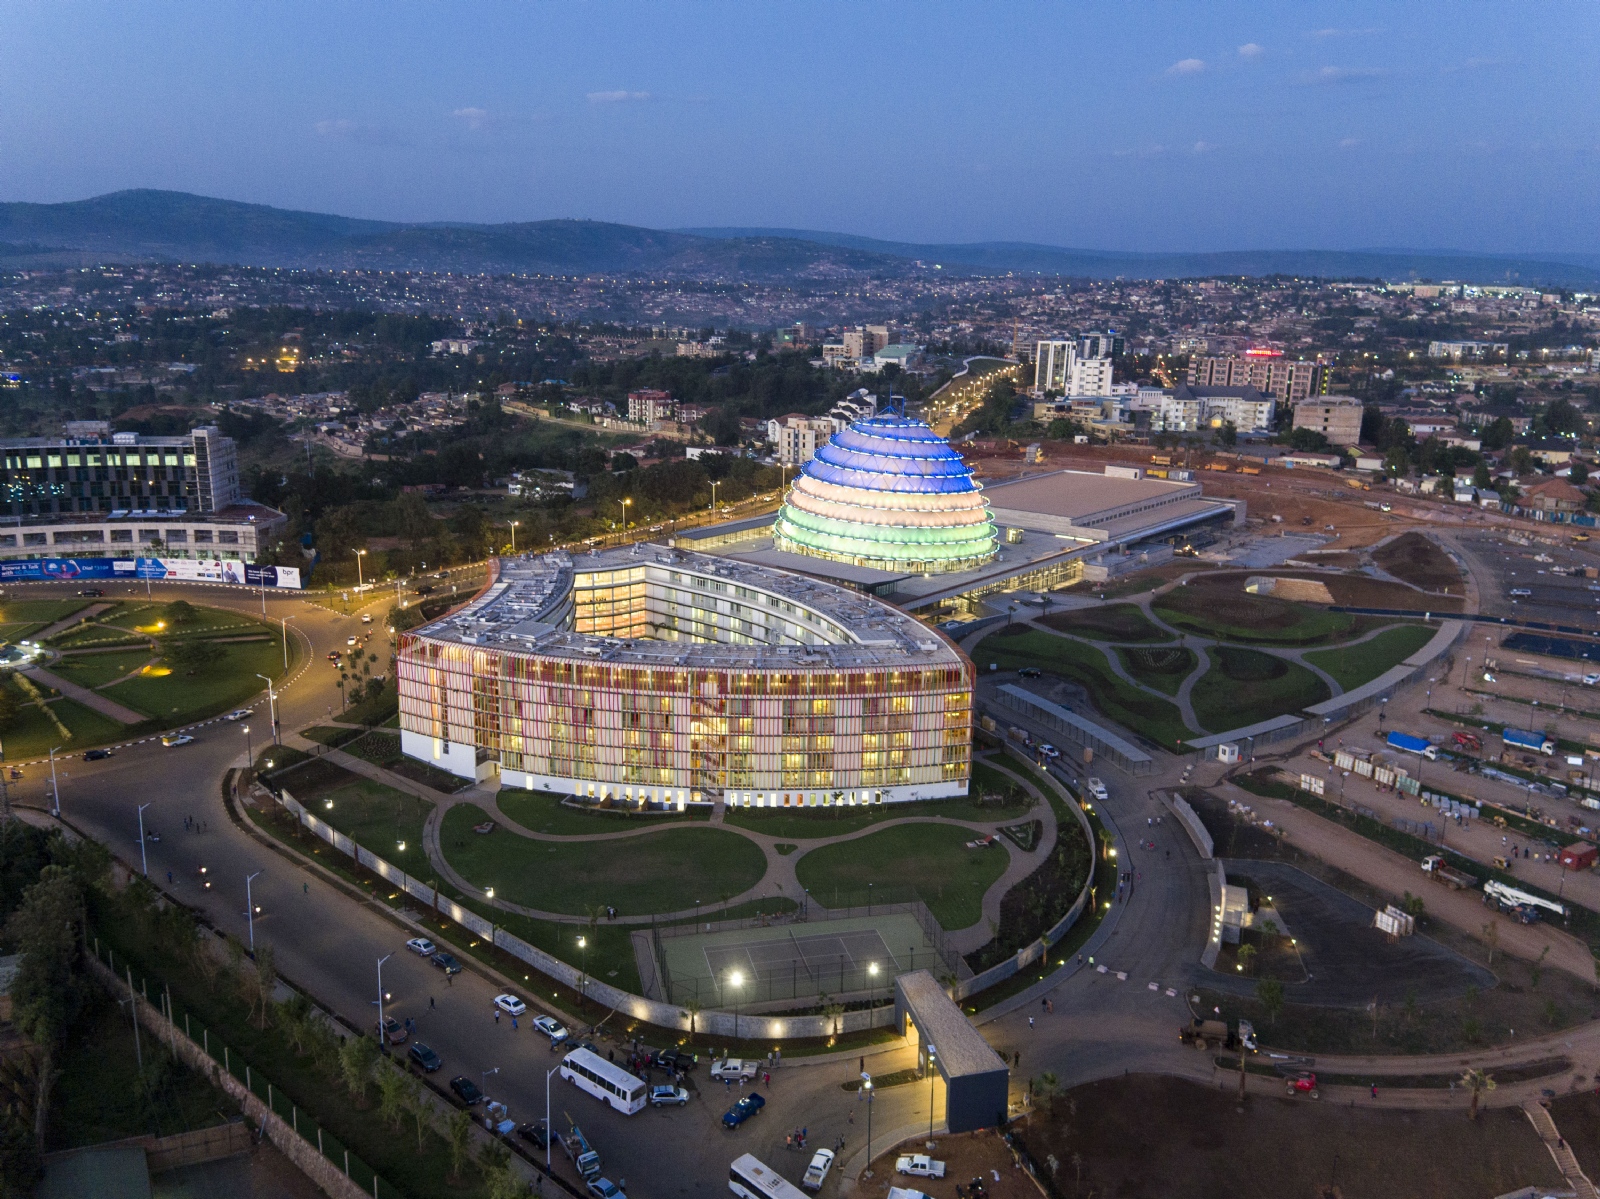 Night-time aerial view of completed Hotel, Dome structure and environs (summa.com.tr)